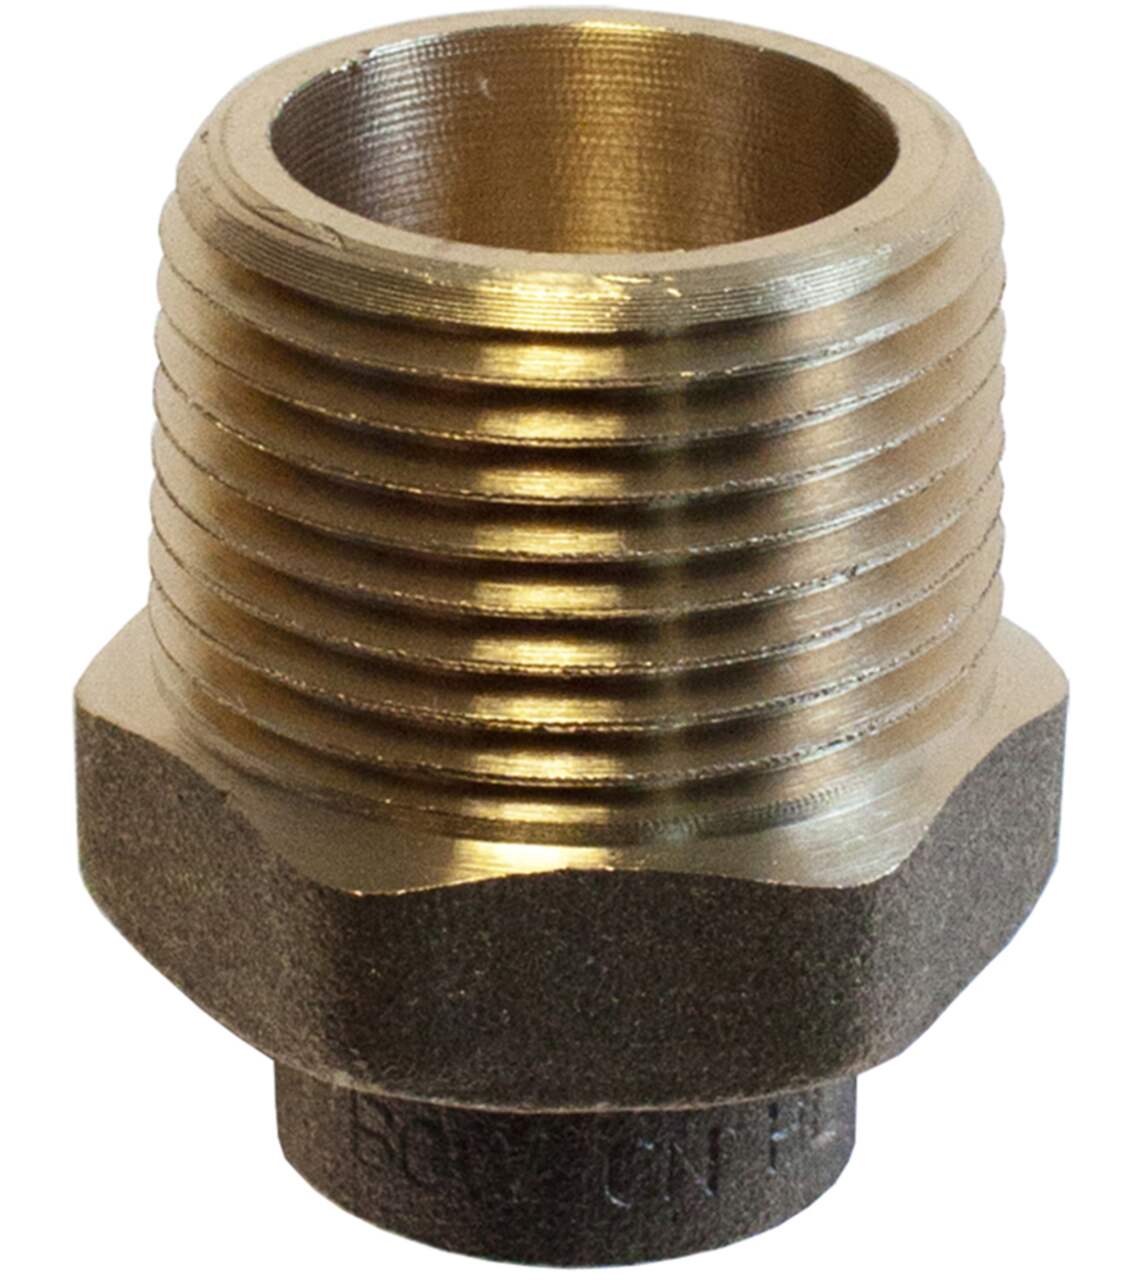 Brass Pipe Thread Adapter Fitting - FPT x MPT Reducer